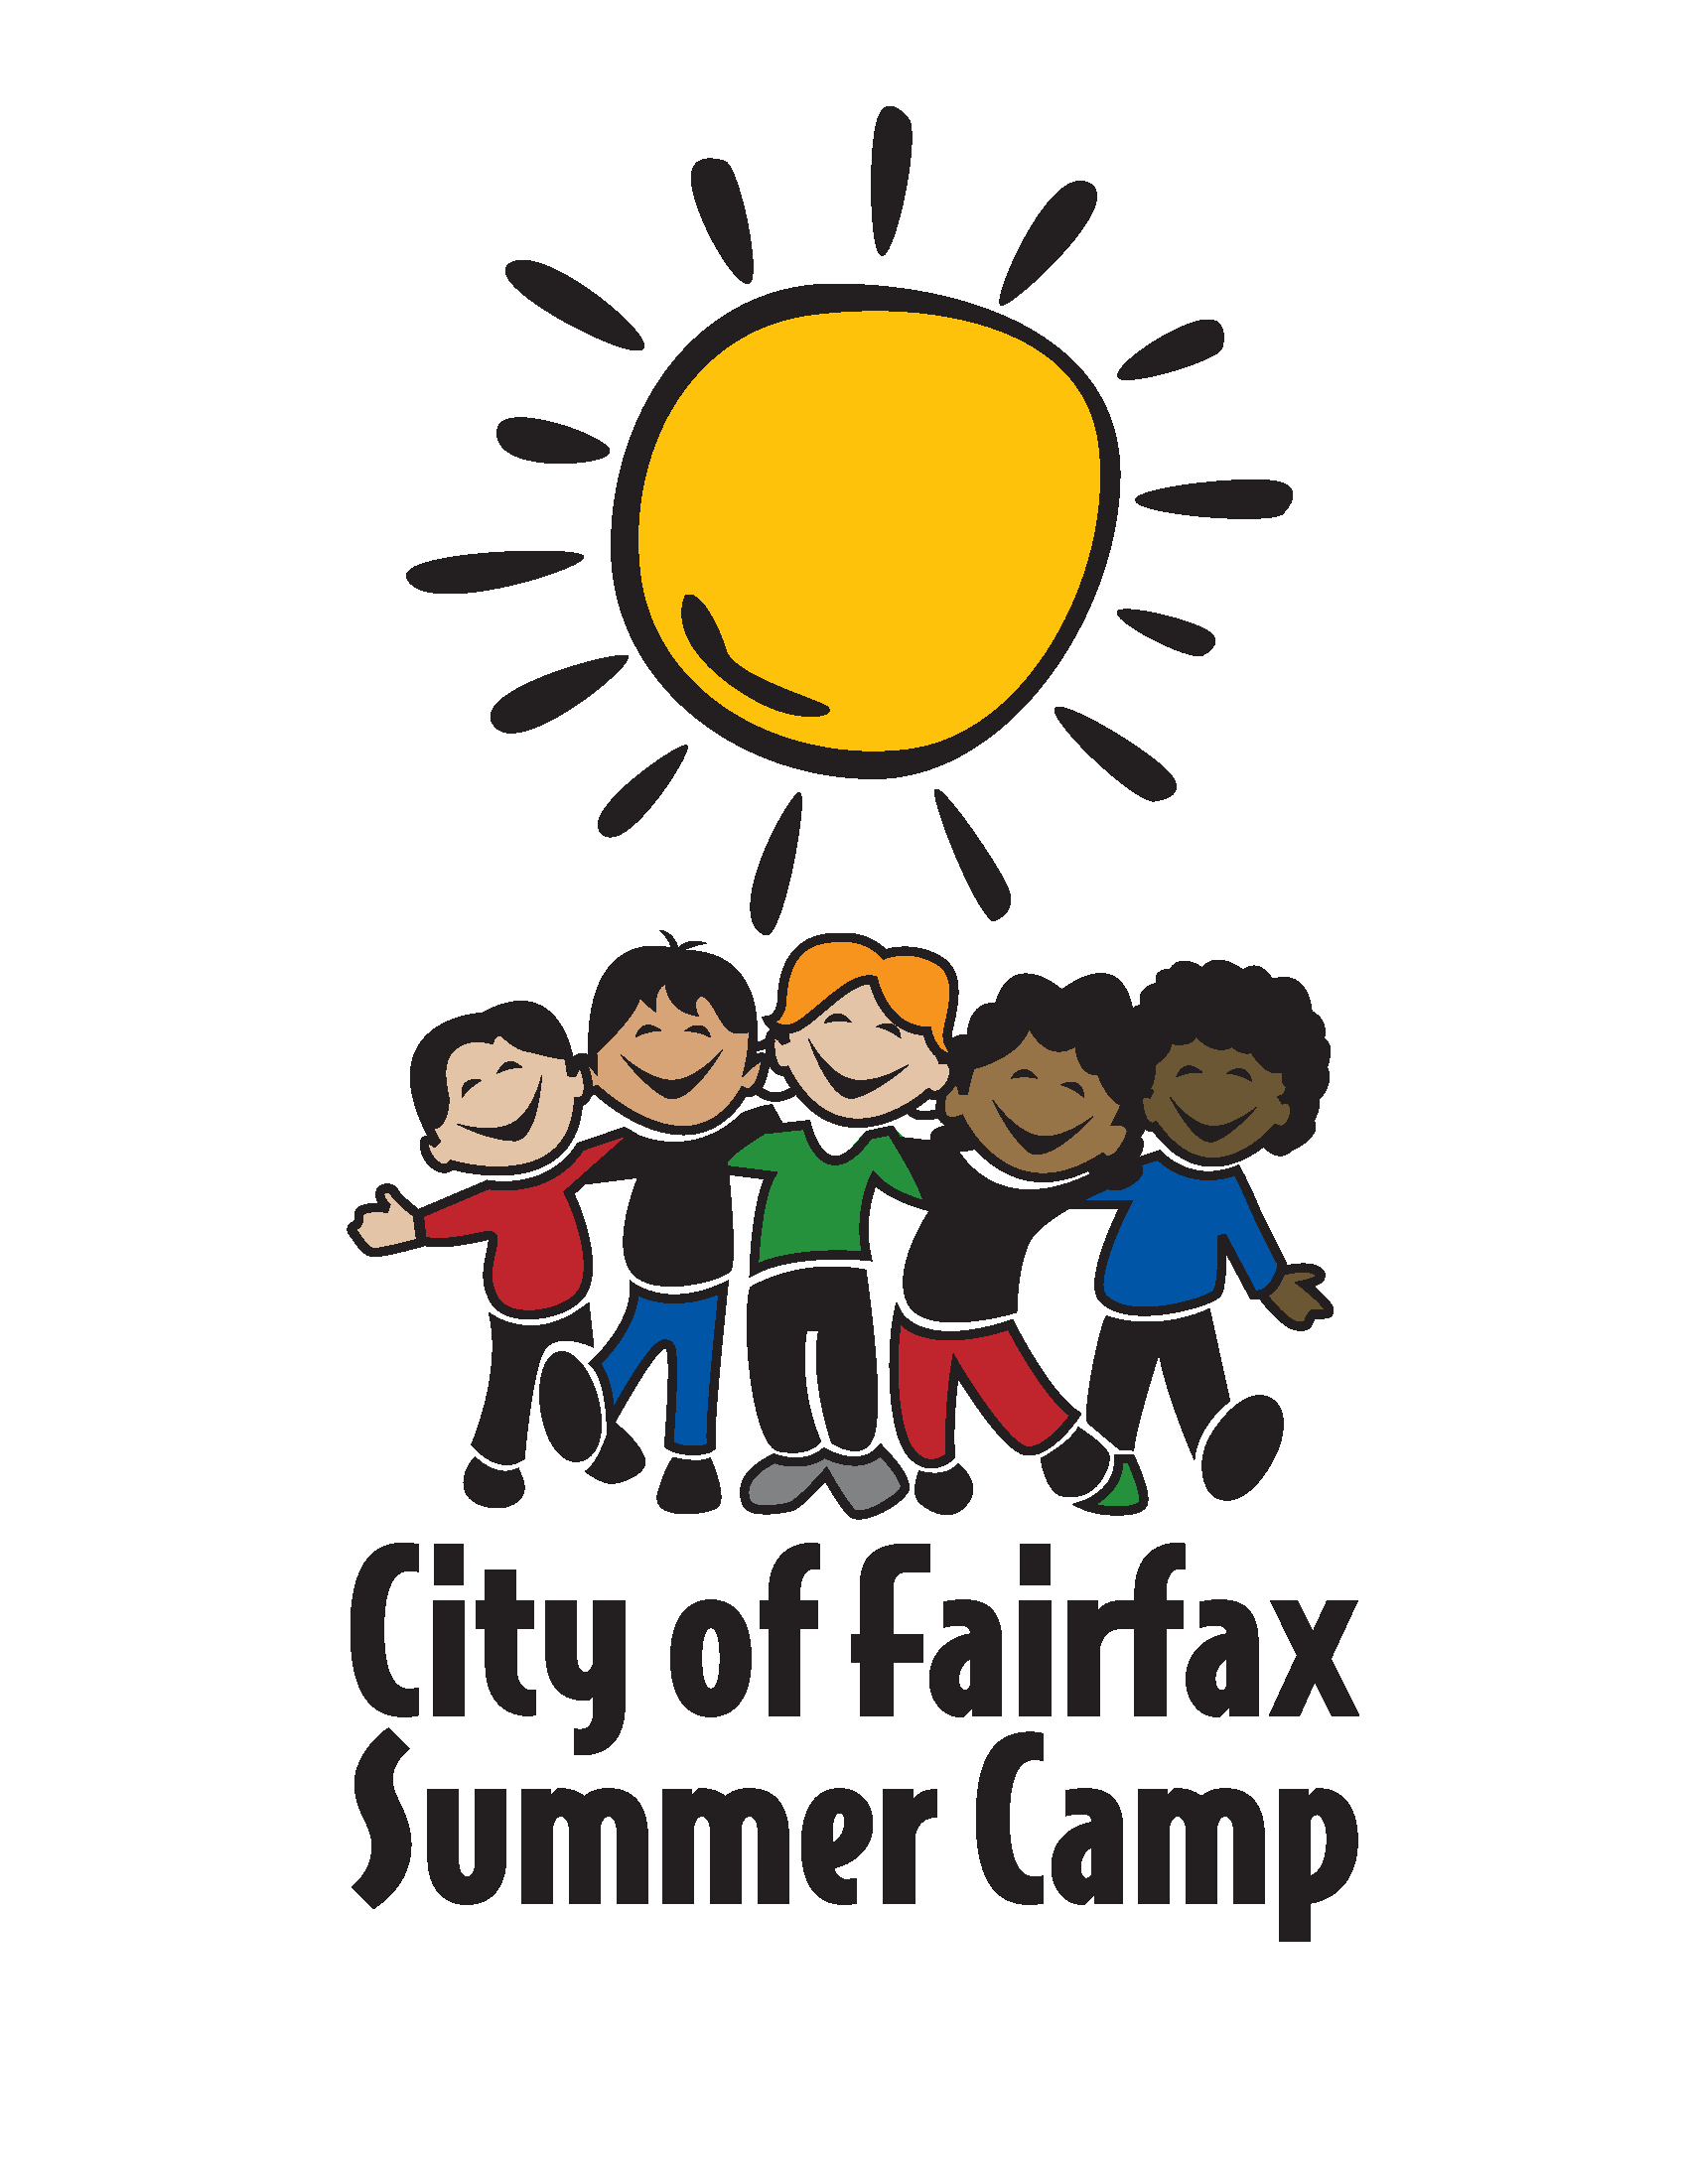 City of Fairfax Summer Camps